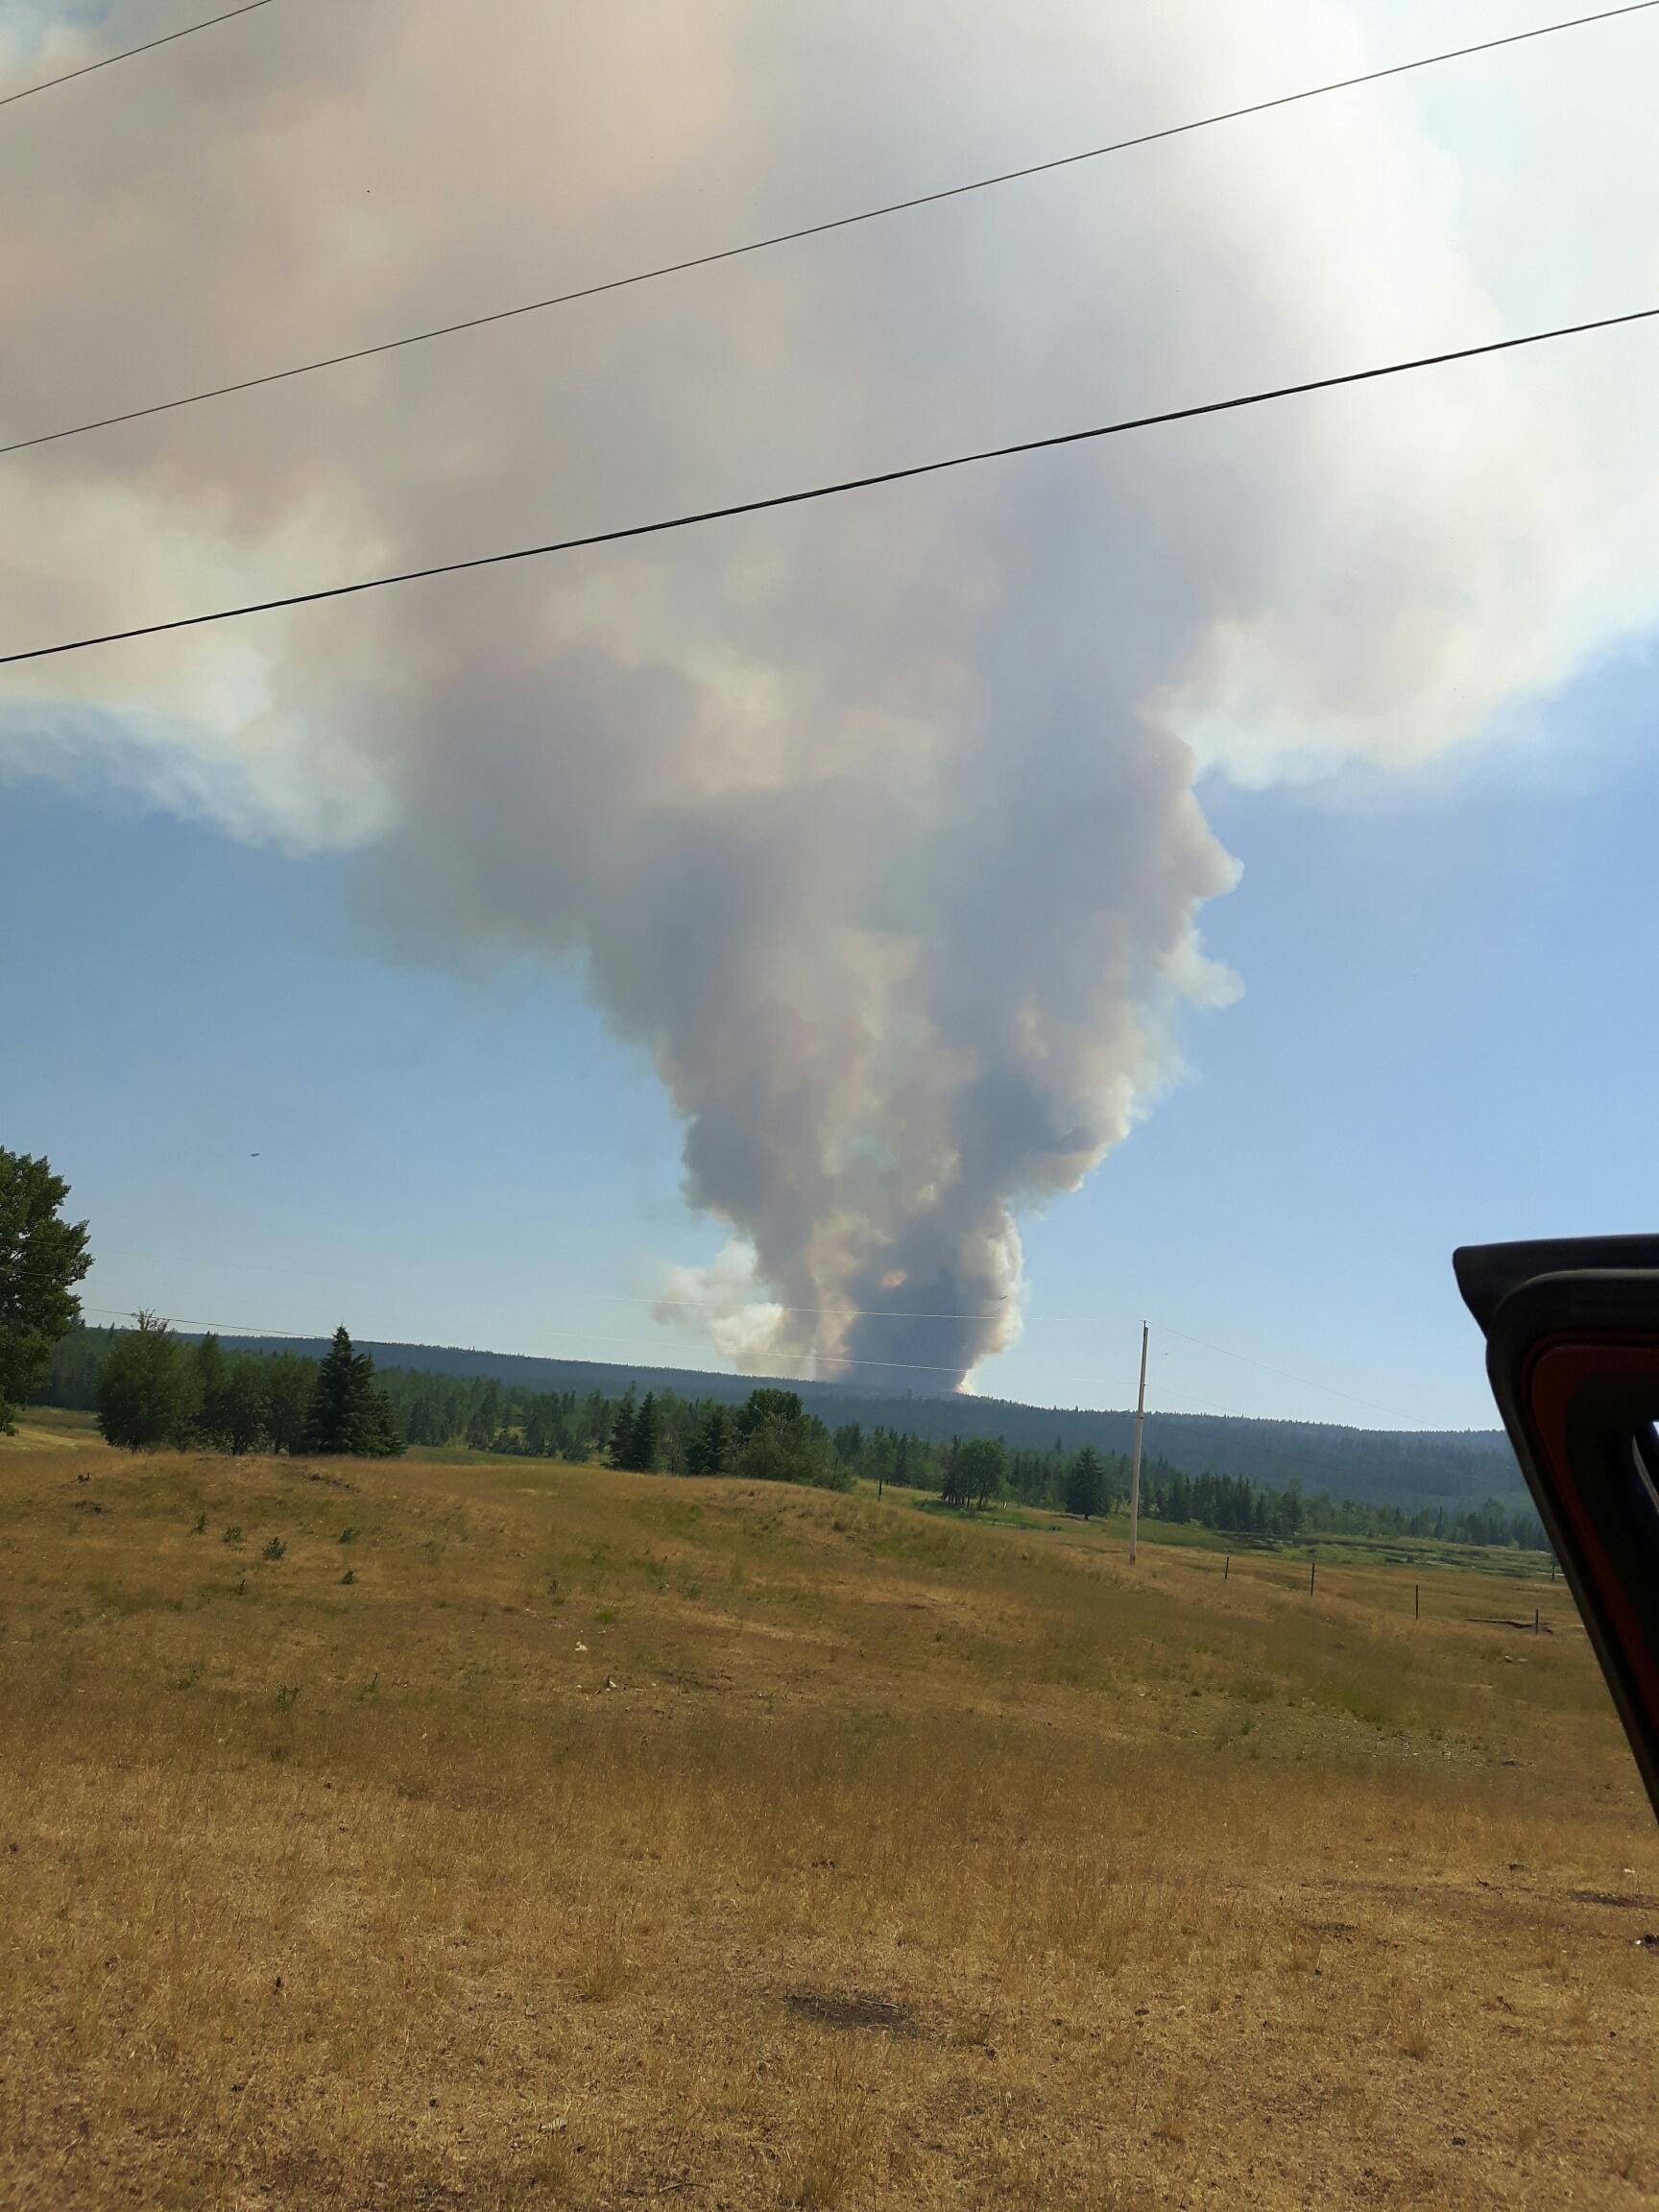 On July 6, Lynn Landry could see a column of smoke in the distance from a nearby forest fire. The fire advanced until it consumed the ridge near her house and she had to evacuate.